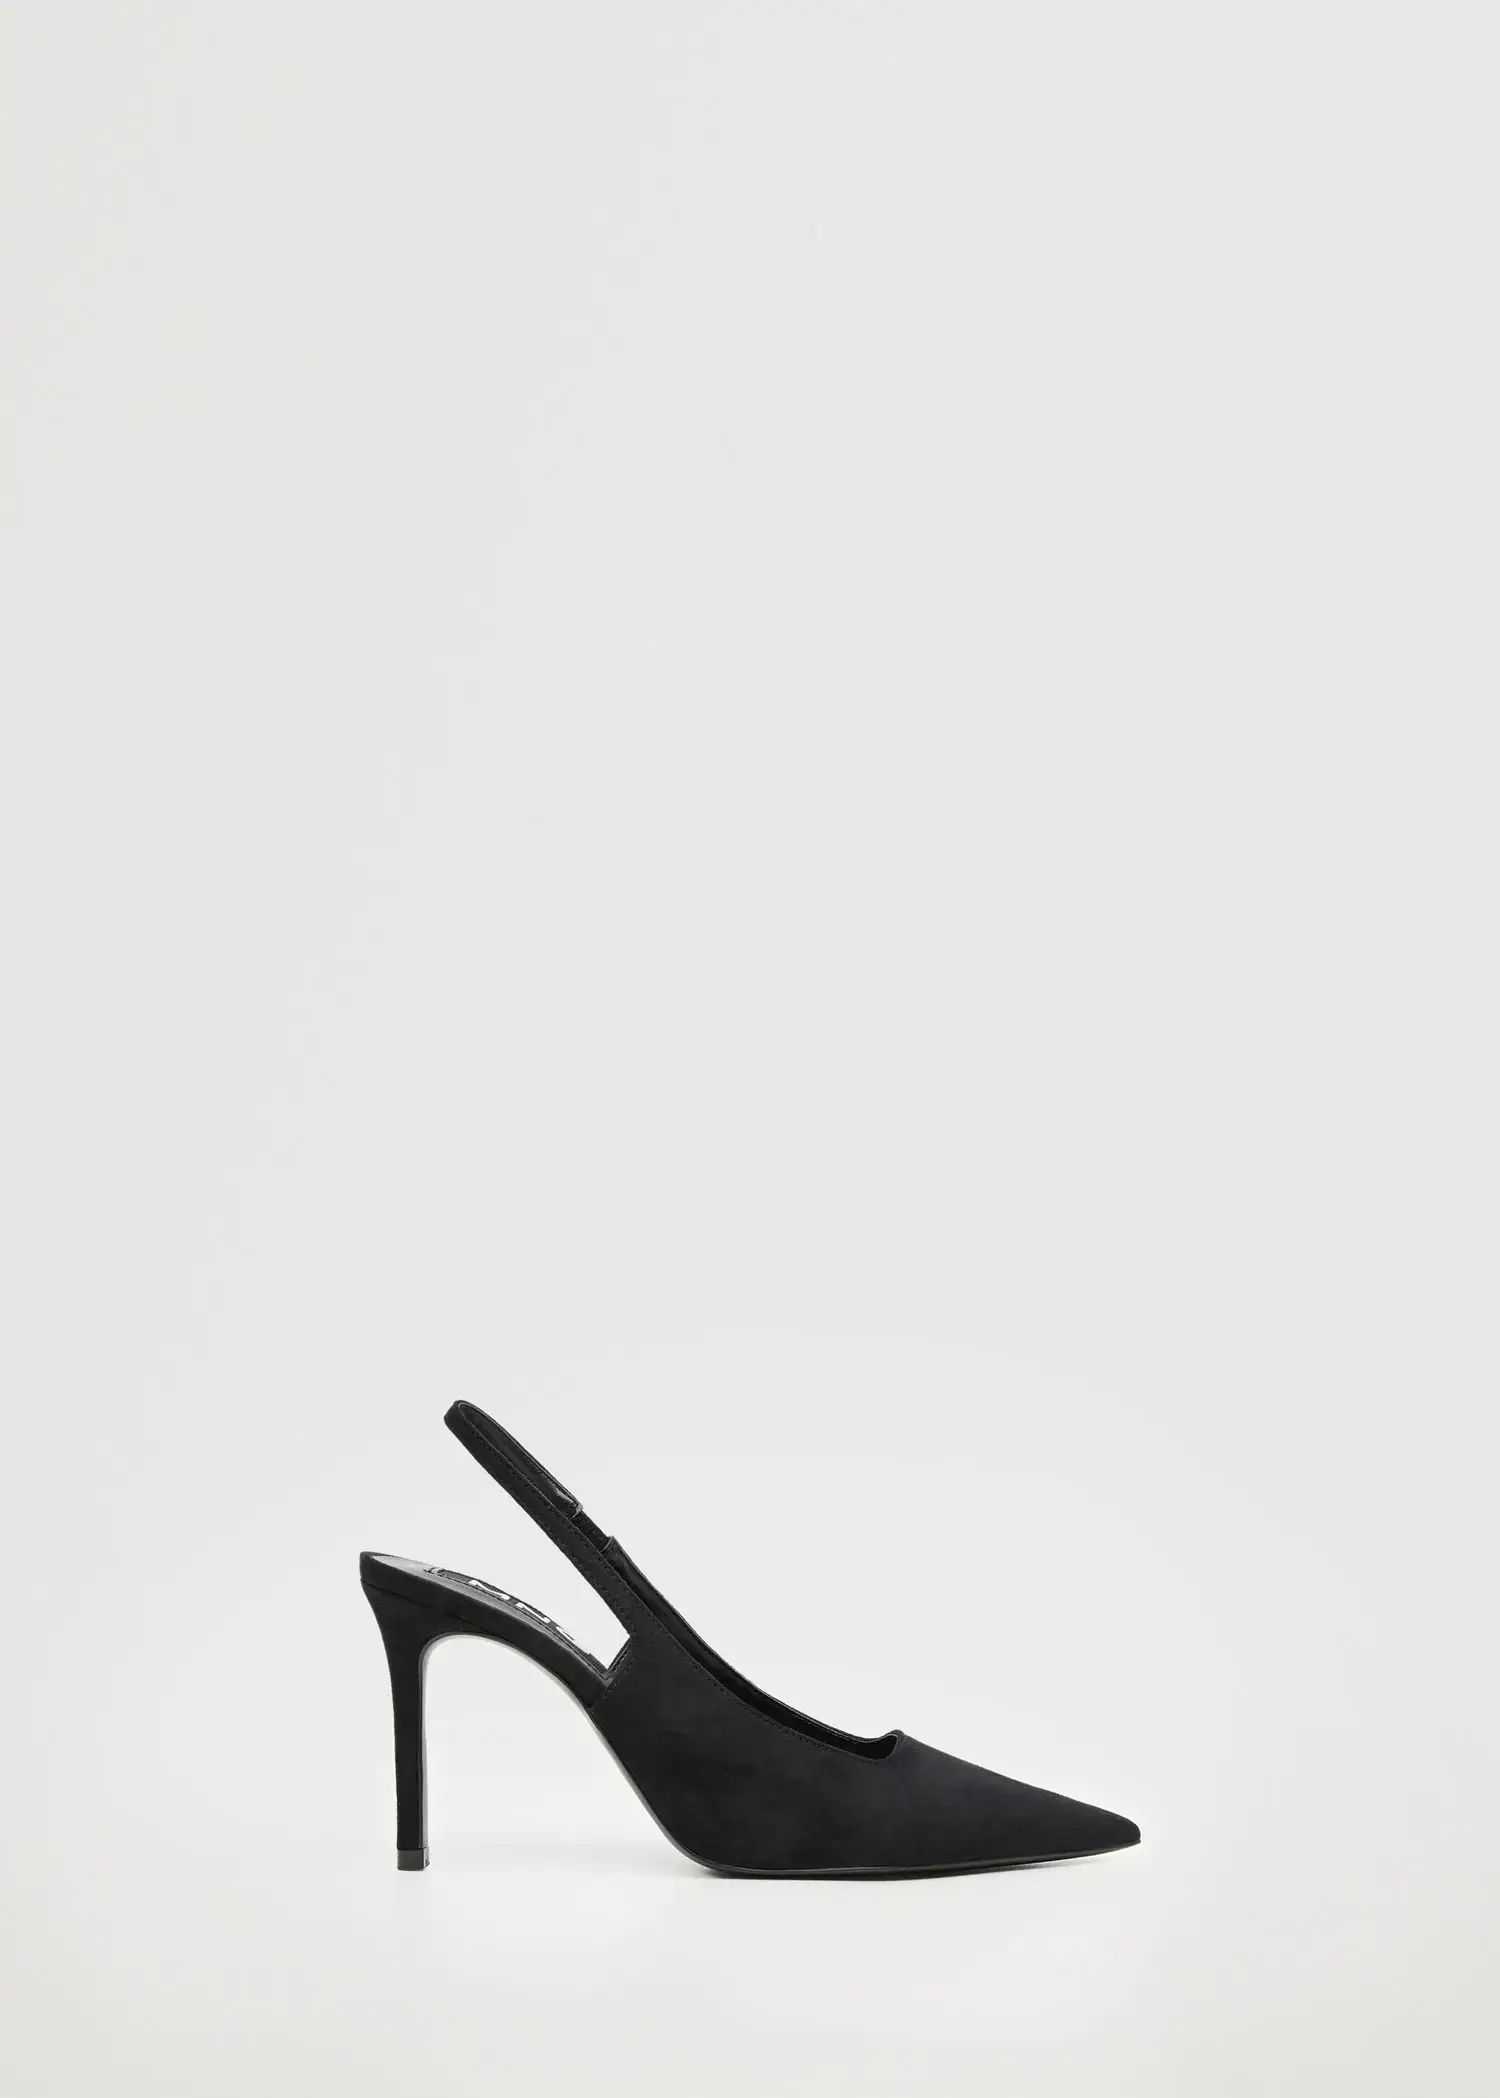 Mango Pointed toe heel shoes. a pair of black high heeled shoes against a white background. 